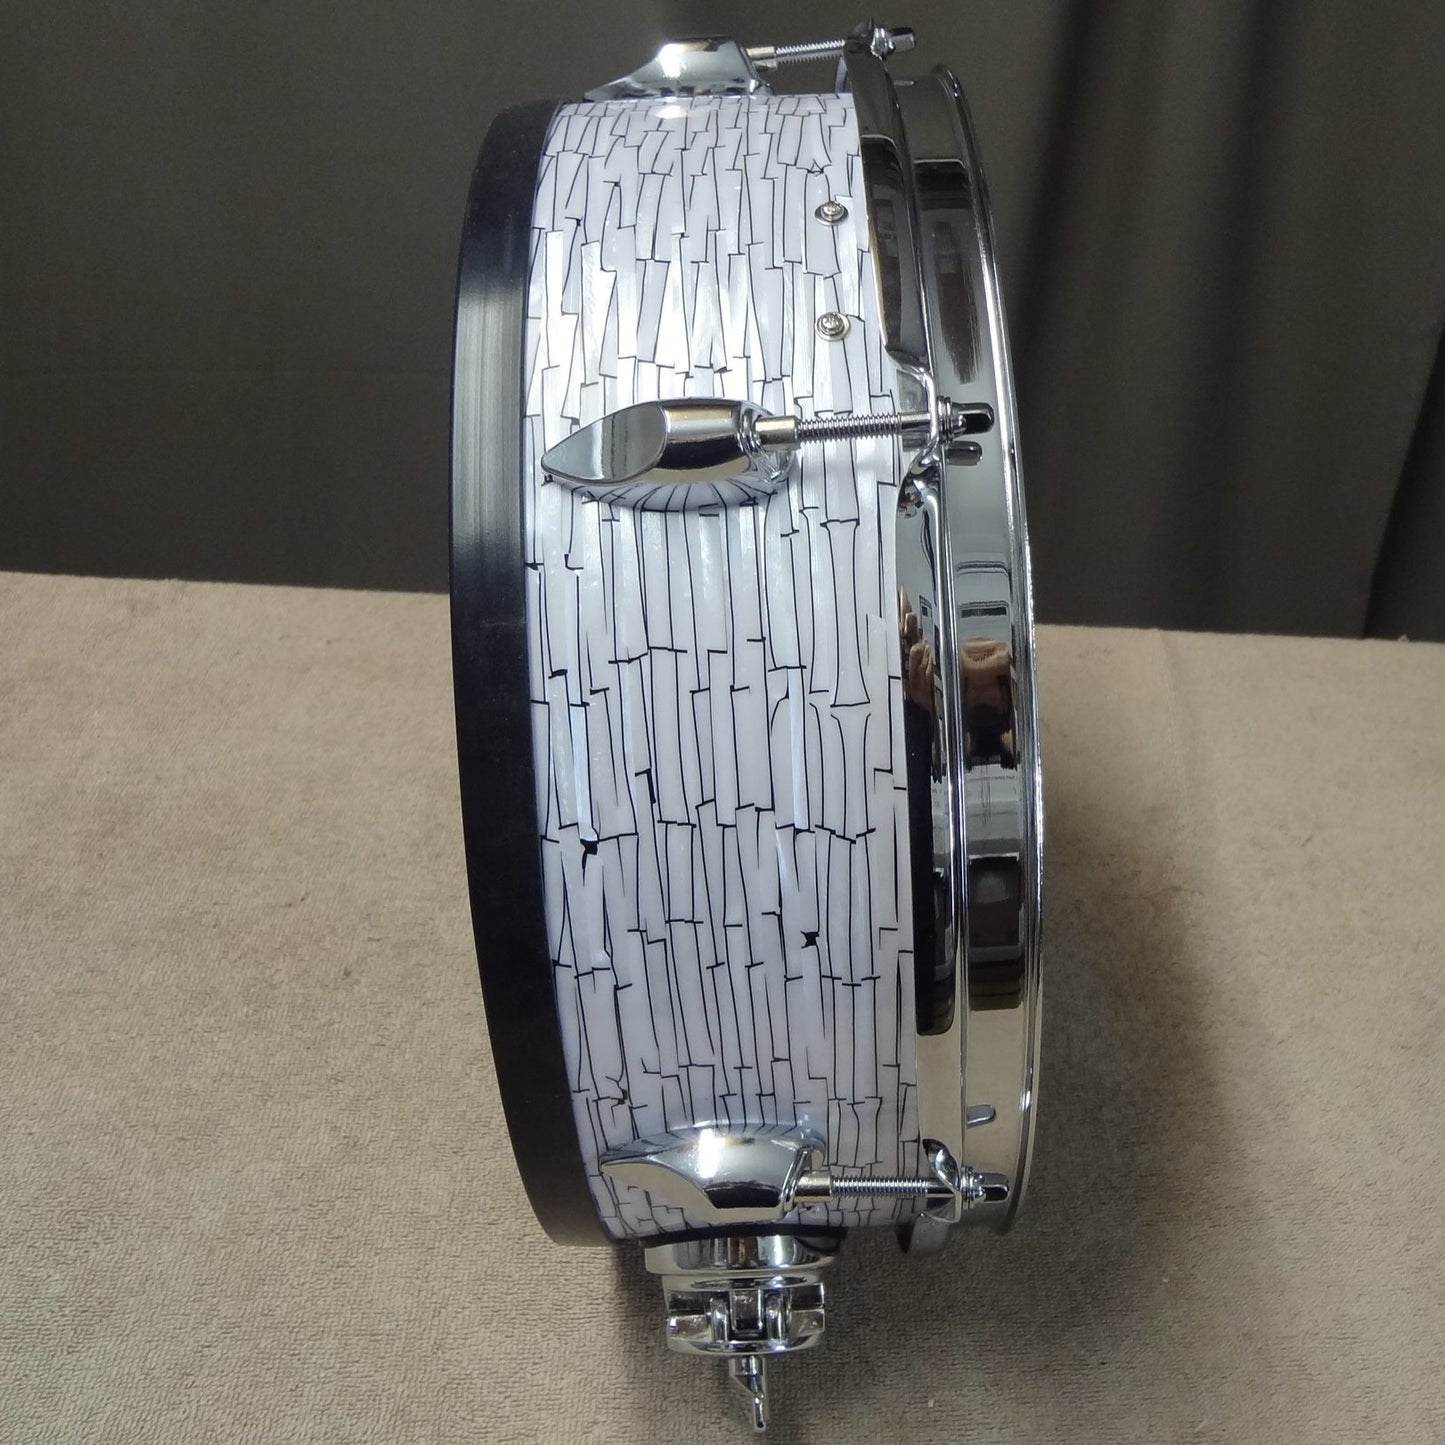 New 13 Inch Custom Electronic Snare Drum - White/Black Etch